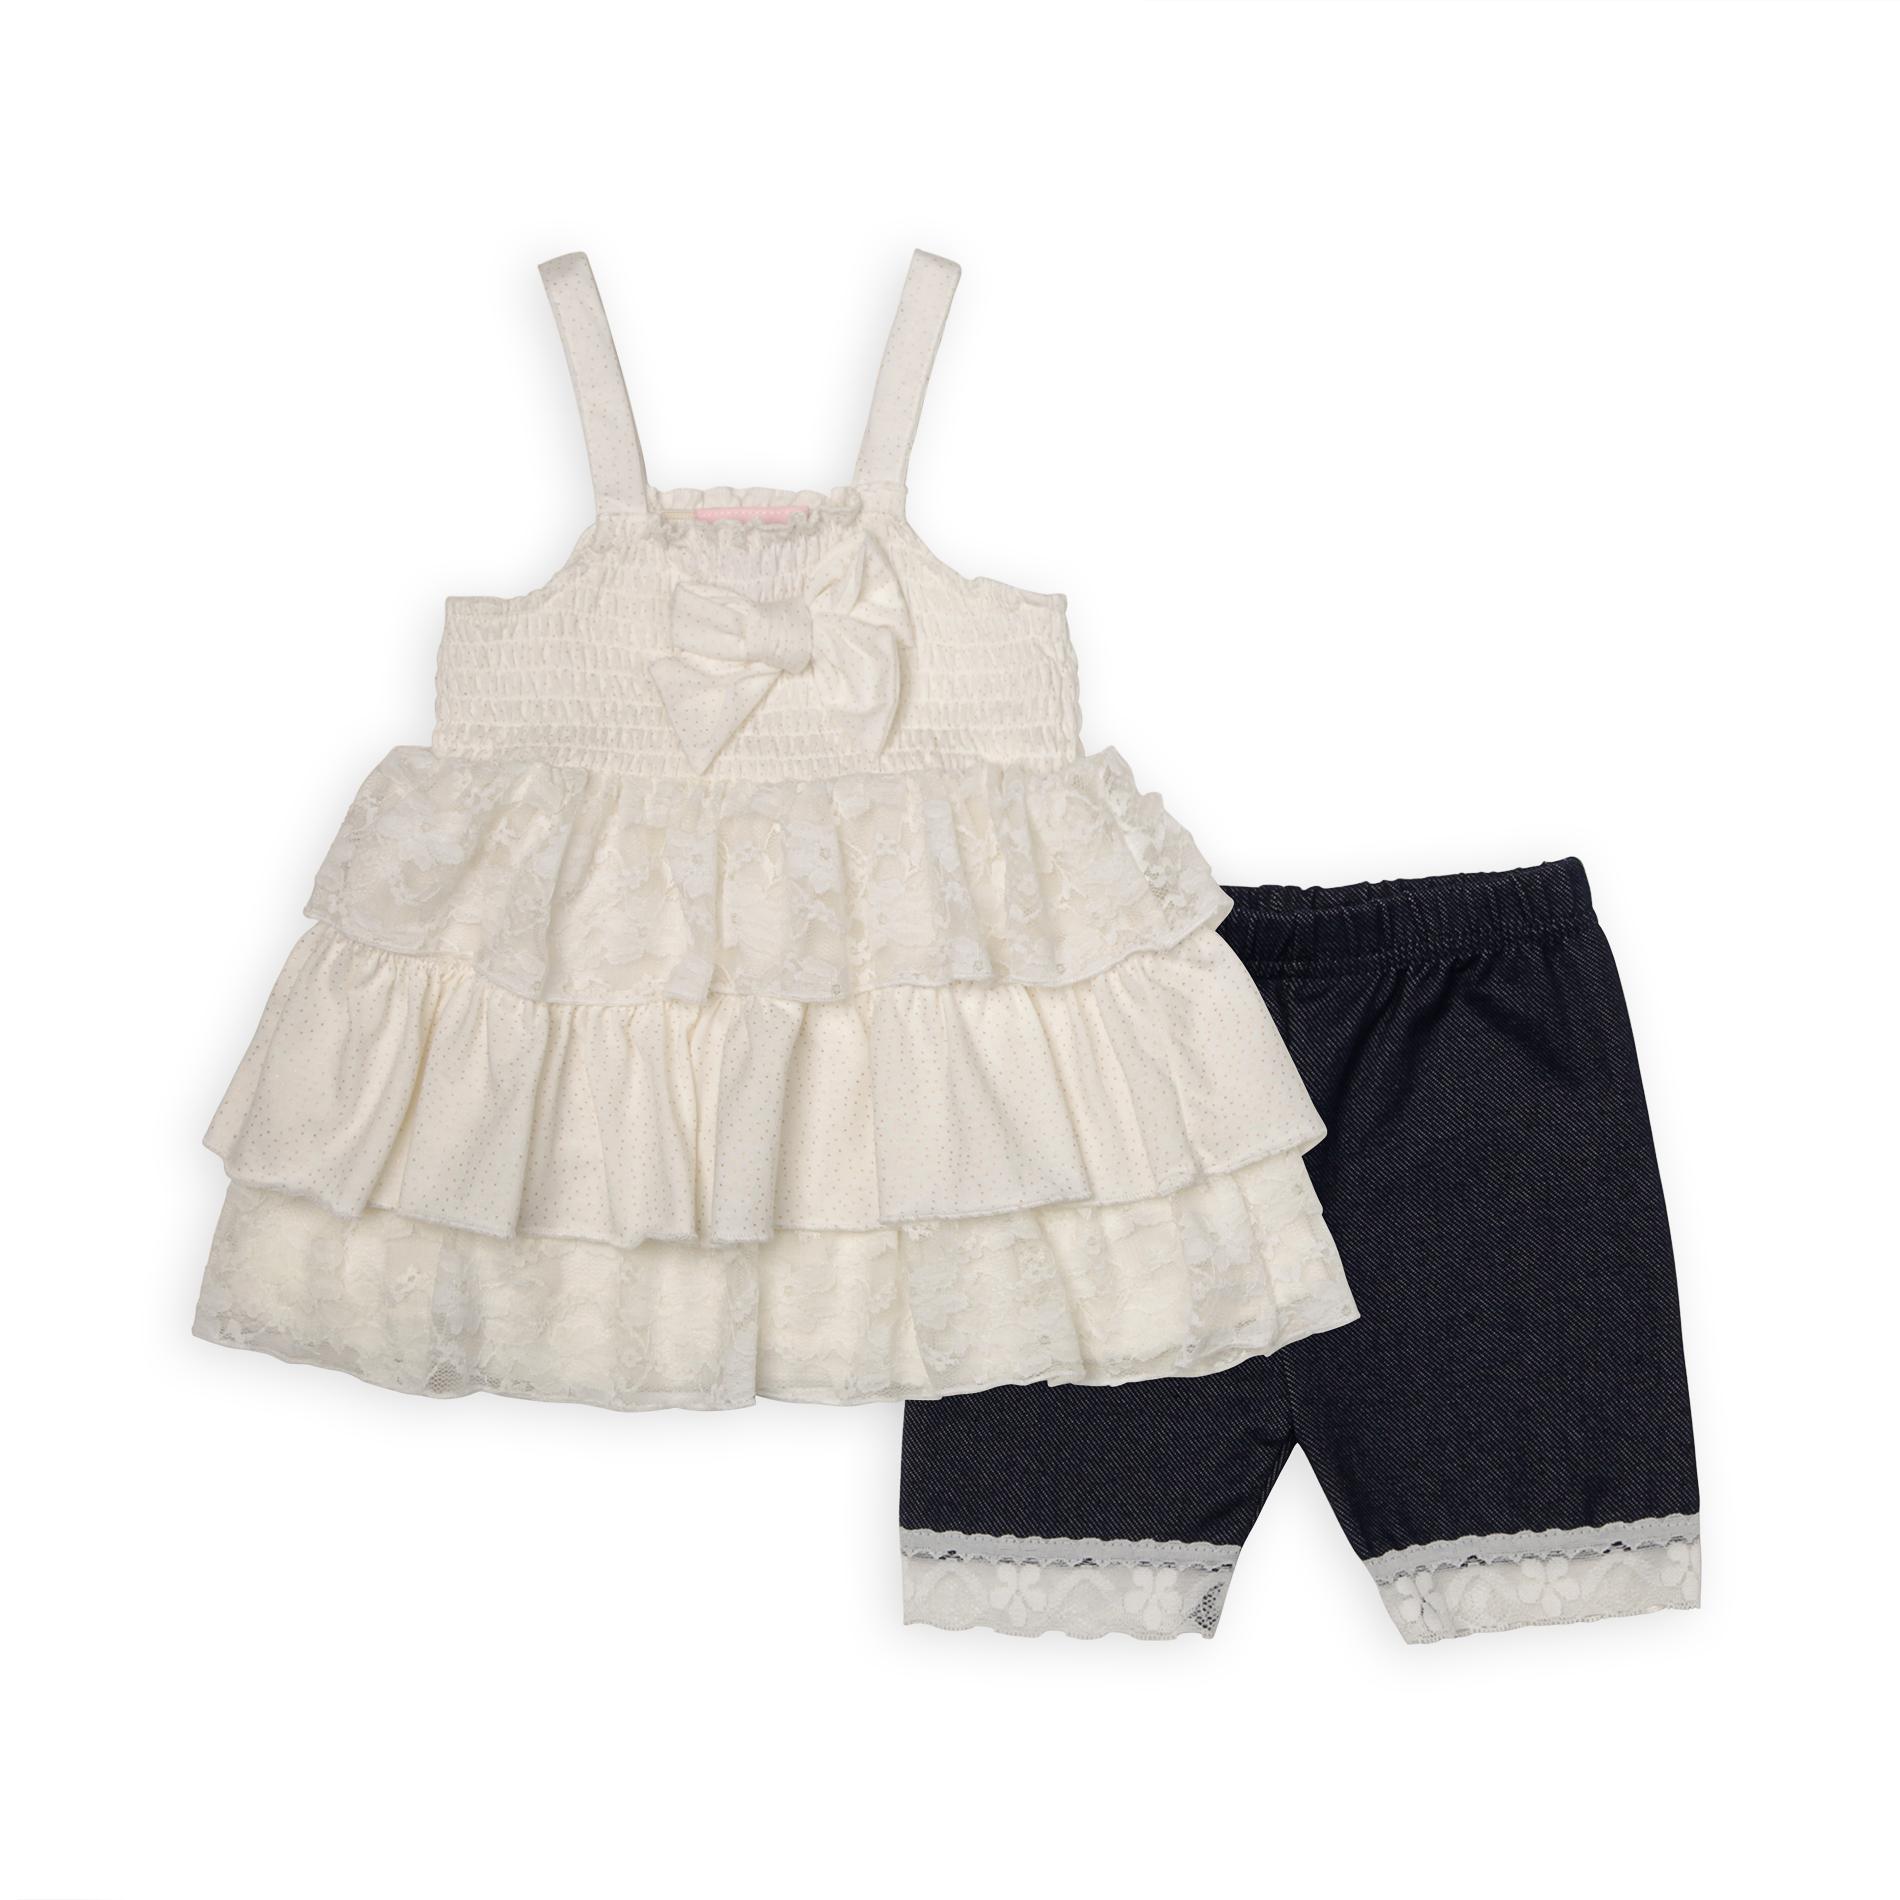 Little Lass Infant & Toddler Girl's Tiered Lace Tank Top & Skimmer